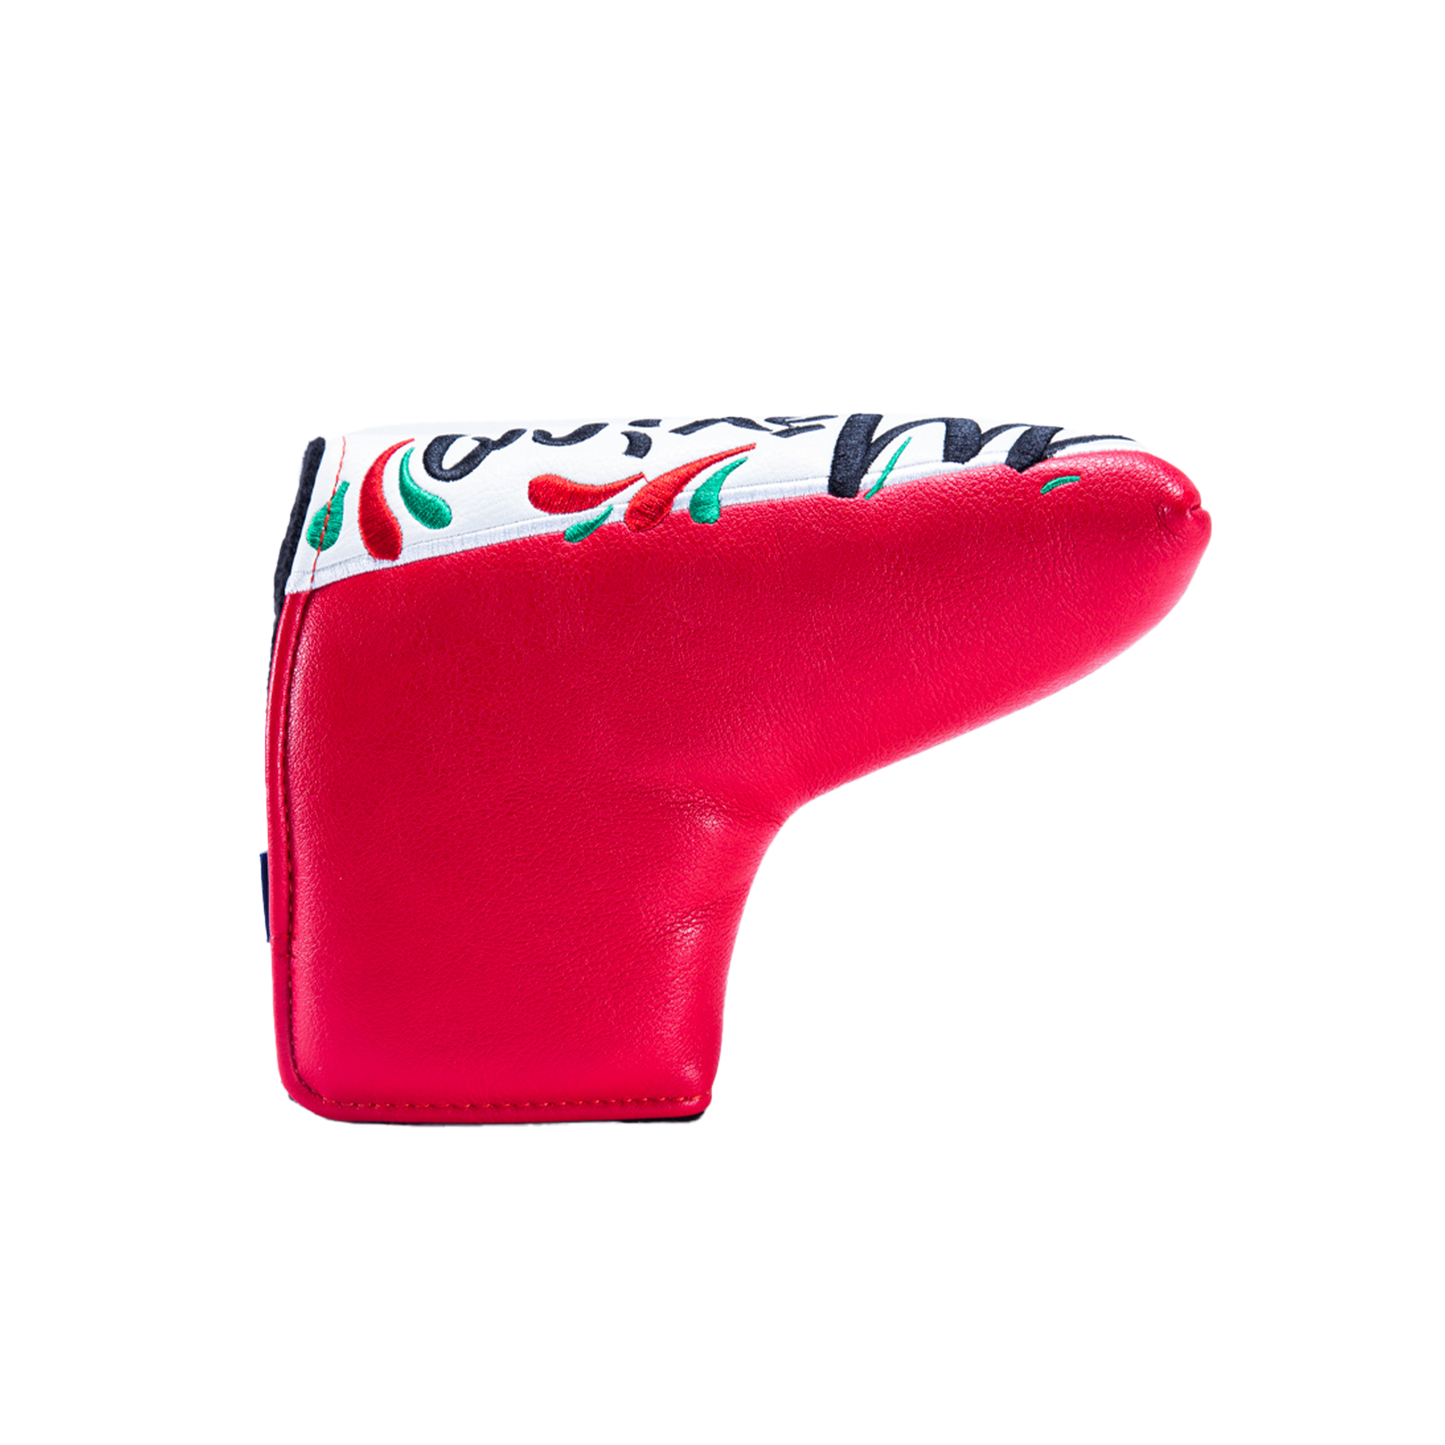 Mexico Blade Putter Cover